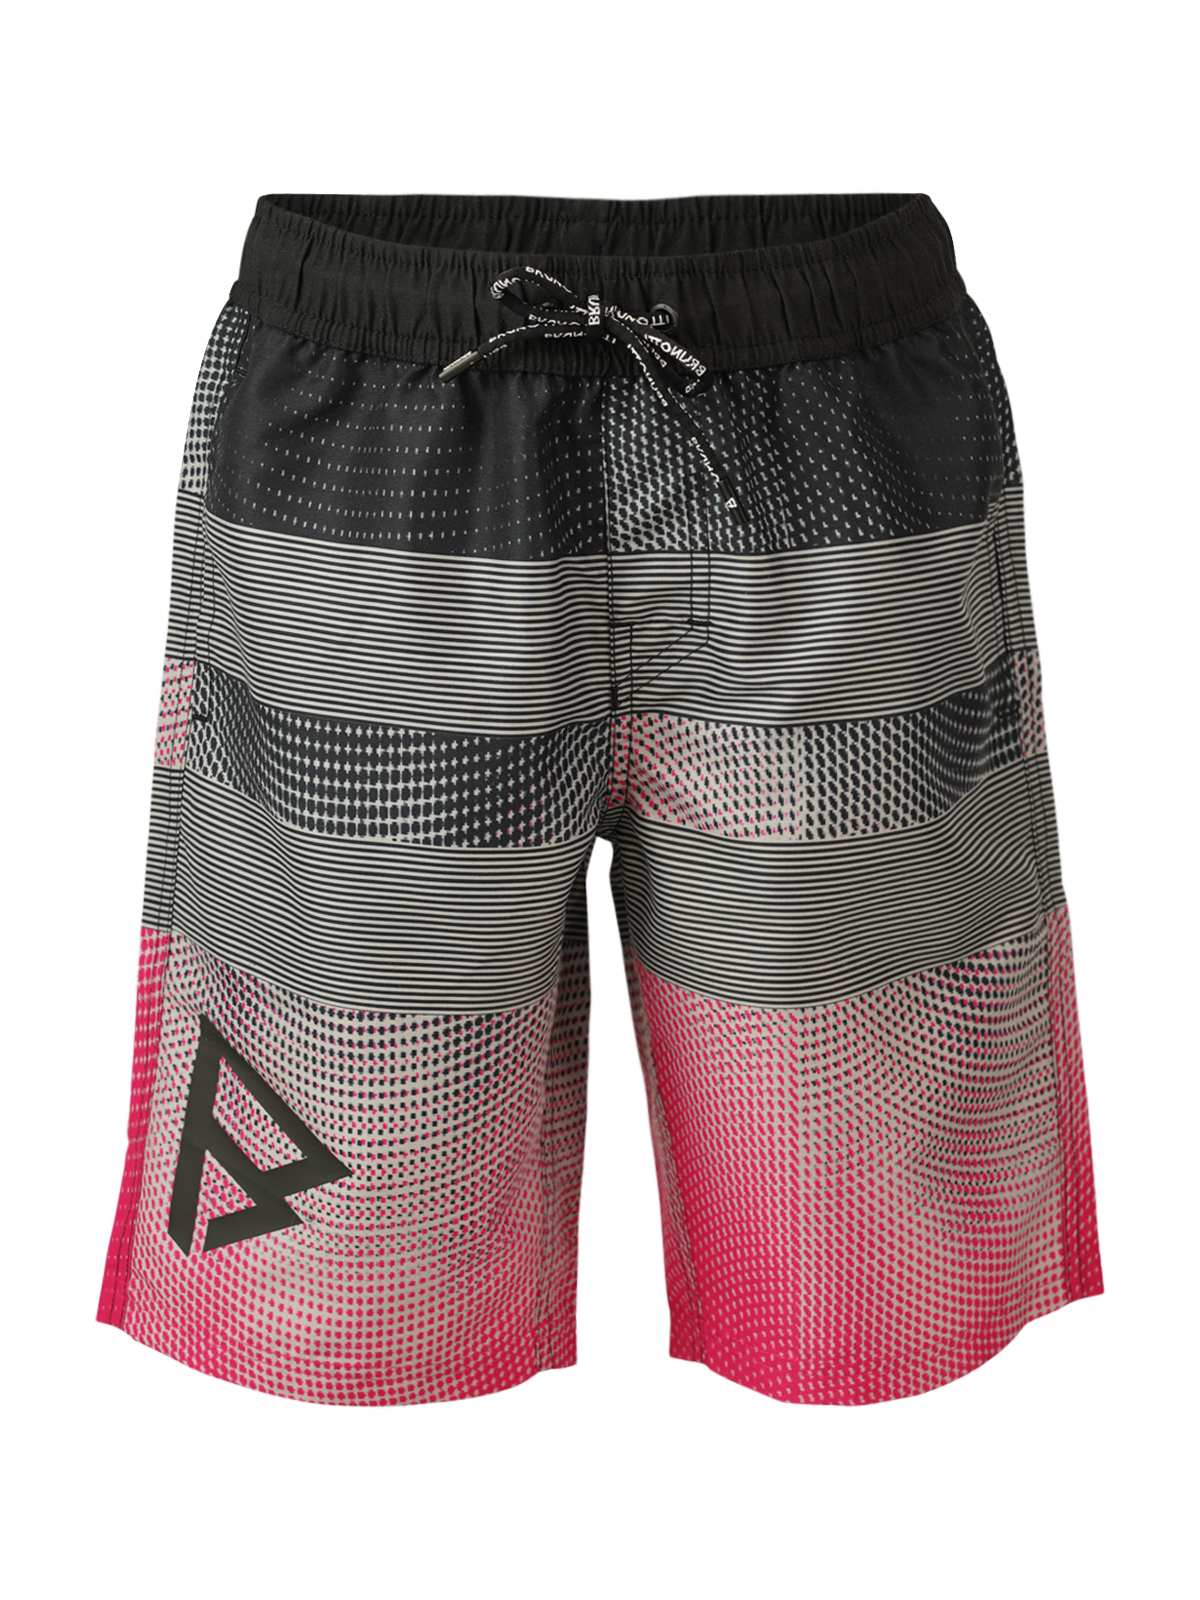 Archaly Jungen Badehose | Red